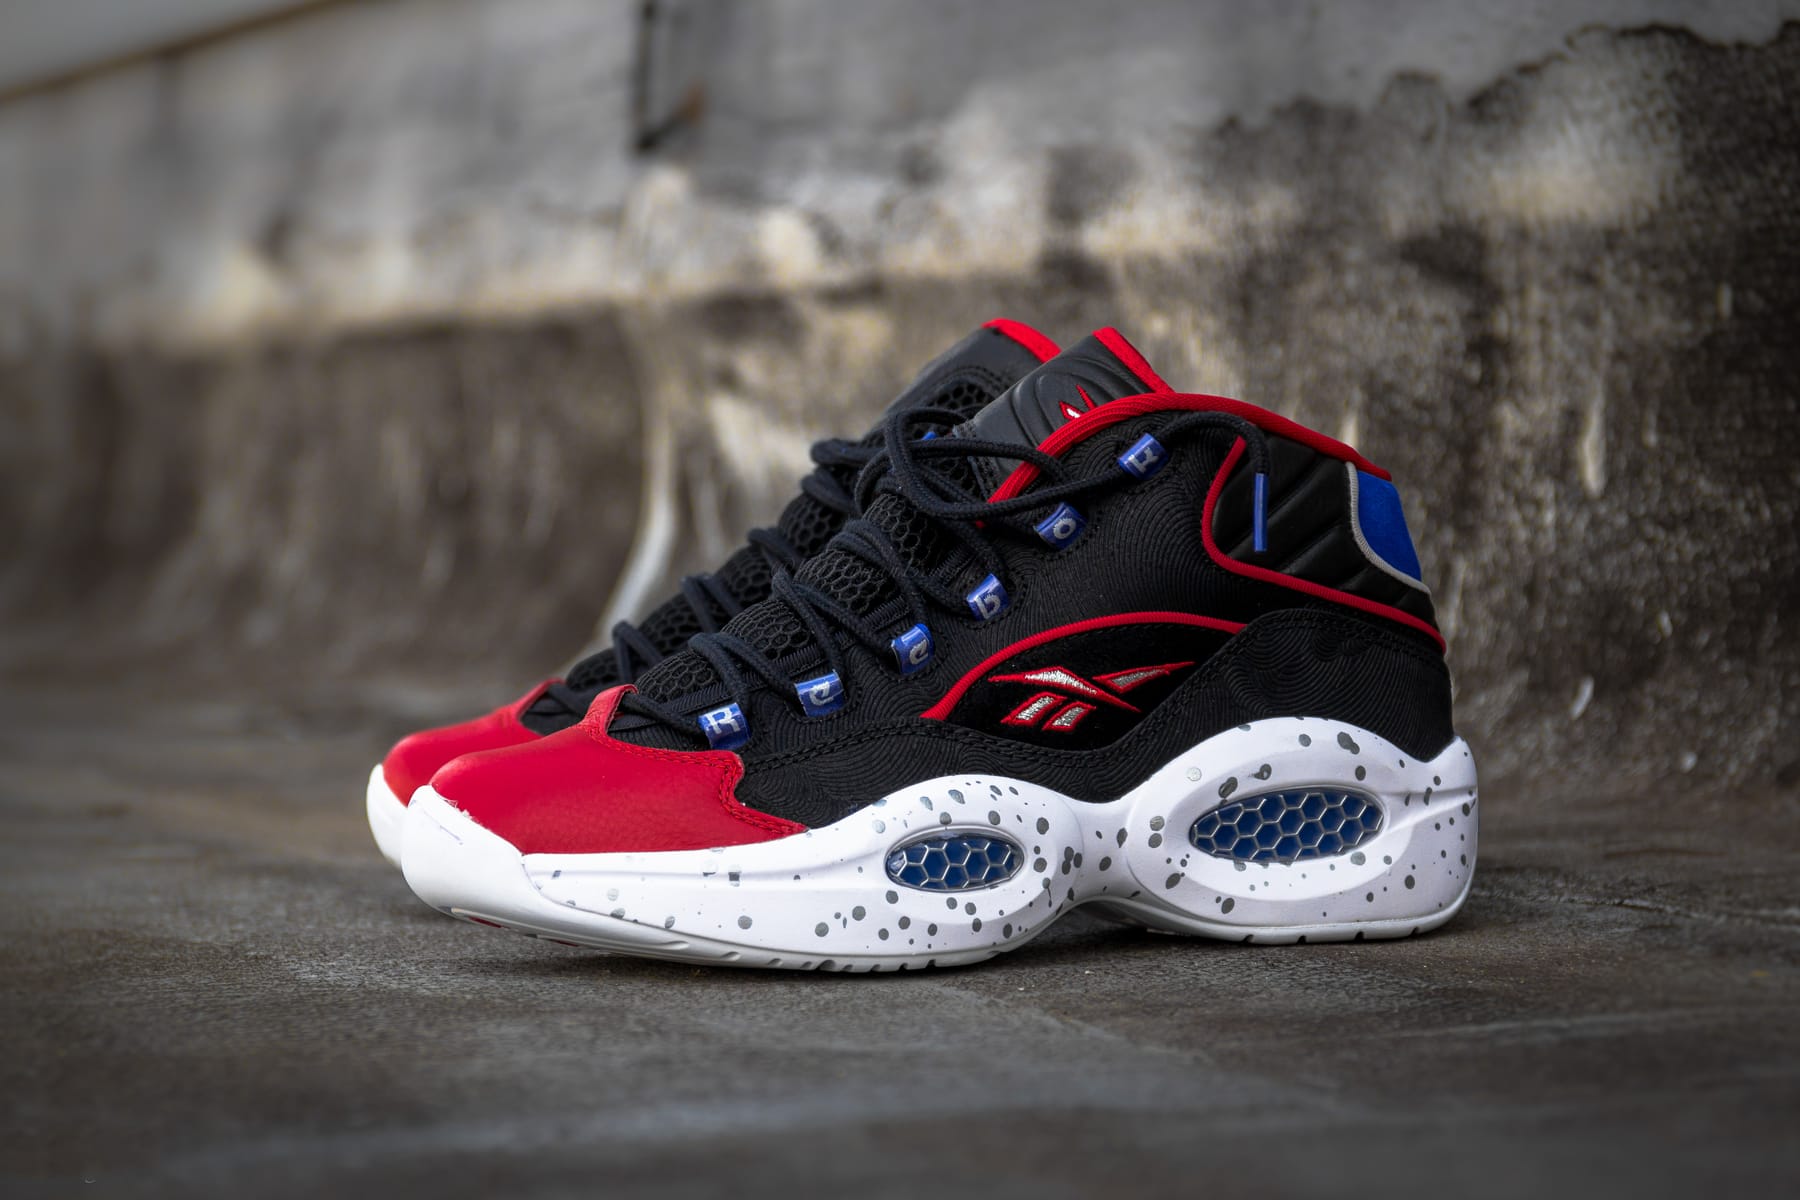 reebok the question colorways - 64% OFF 